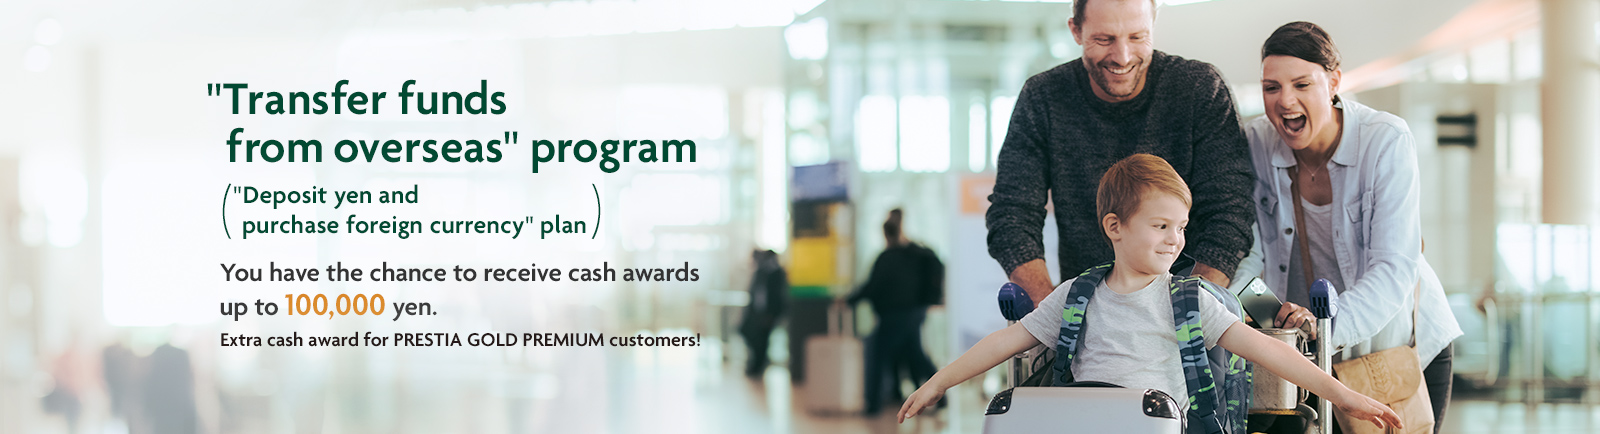 "Transfer funds from overseas" program "Deposit yen and purchase foreign currency" plan. You have the chance to receive cash awards up to 100,000 yen. Extra cash award for PRESTIA GOLD PREMIUM customers!